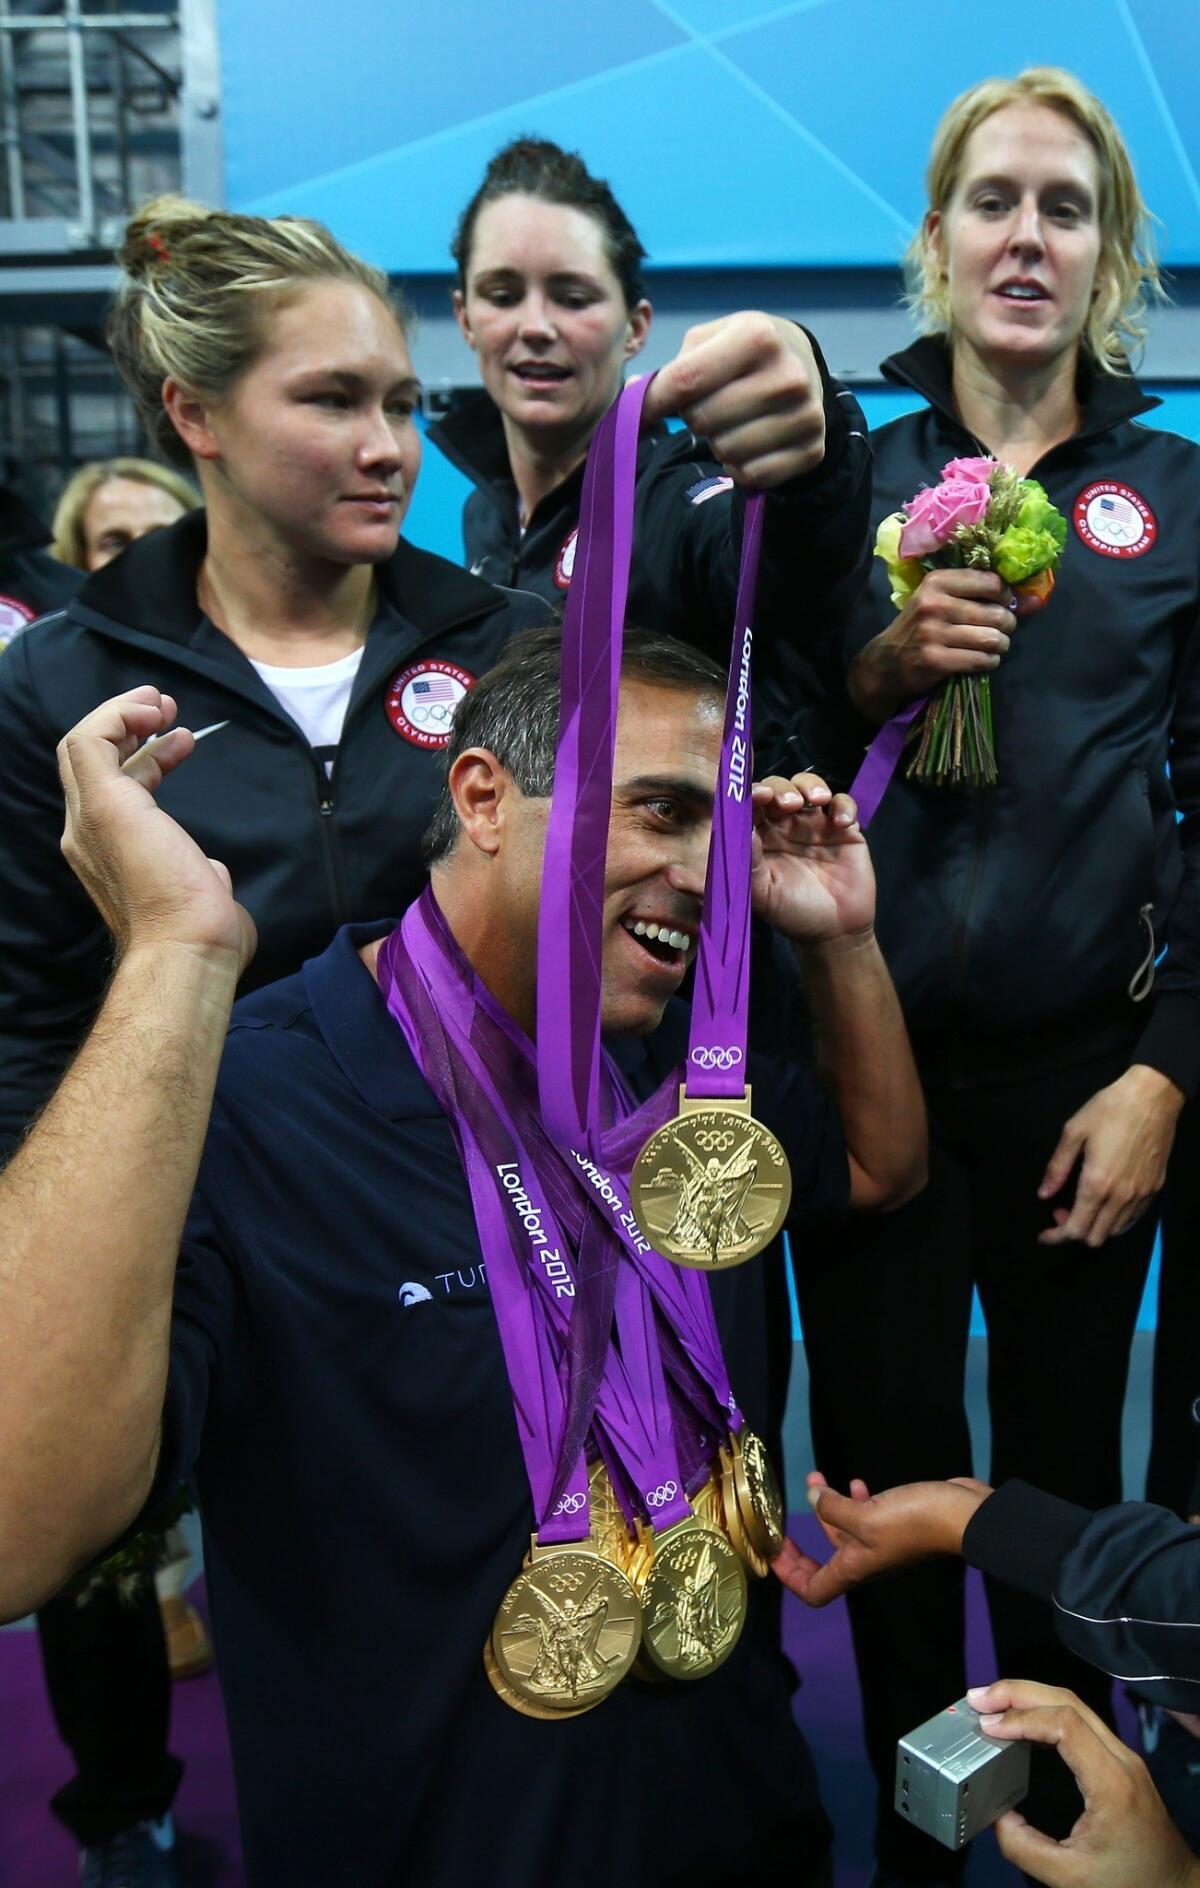 The U.S. women's water polo team honors coach Adam Krikorian by placing their gold medals around his neck at the 2012 London Olympic Games.